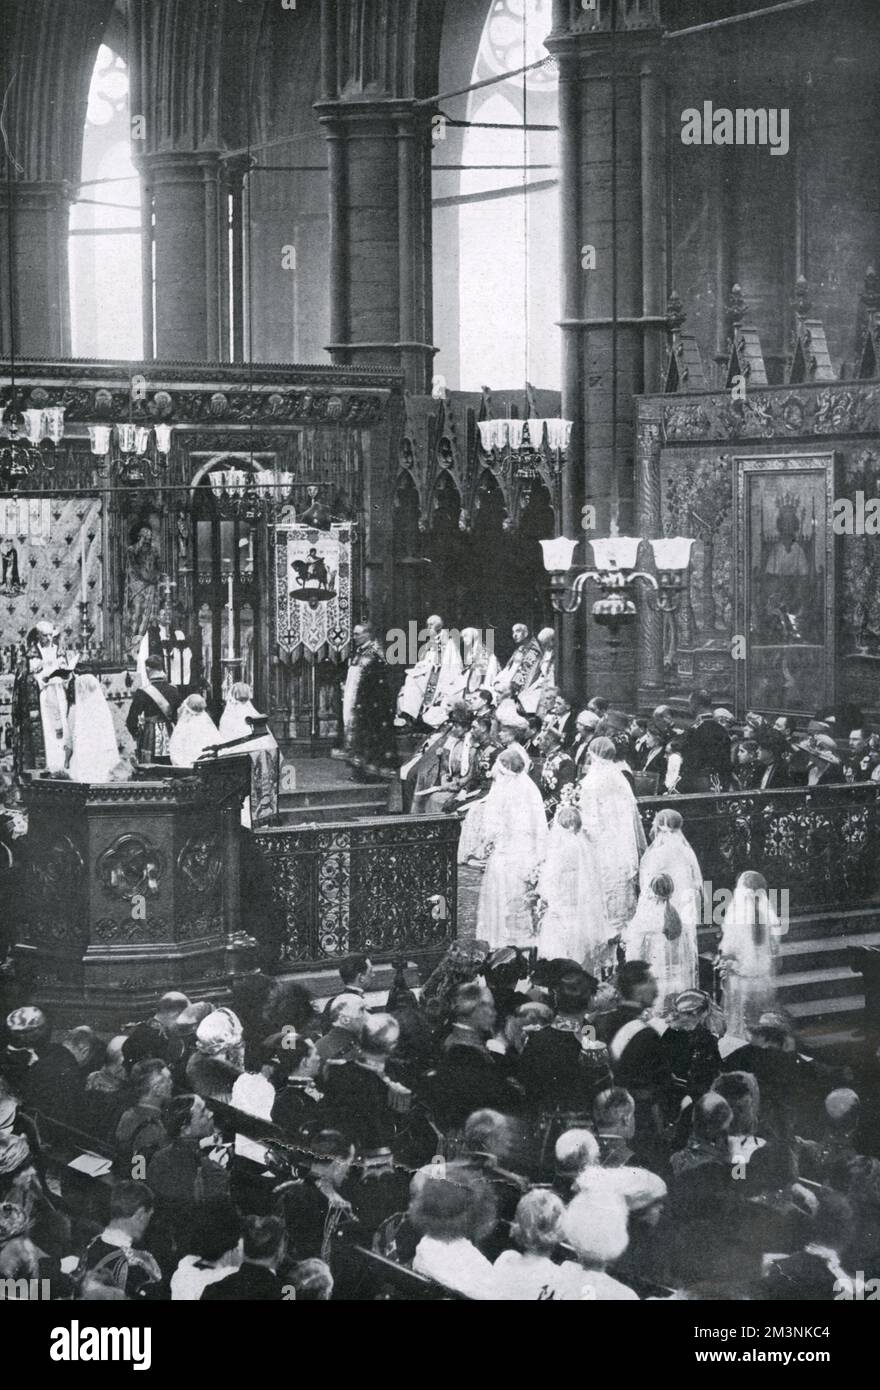 Inside Westminster Abbey during the marriage service of Princess Mary, only daughter of King George V and Queen Mary, later Princess Royal and Countess of Harewood, to Viscount Lascelles, later 6th Earl of Harewood. The couple are kneeling and being addressed by the Archbishop of Canterbury, Randall Davidson. On the first row of chairs are seated King George V, Queen Mary, the Duke of York (later George VI), and the Duchess of Fife, at this point holding the title Princess Royal.     Date: 28th February 1922 Stock Photo